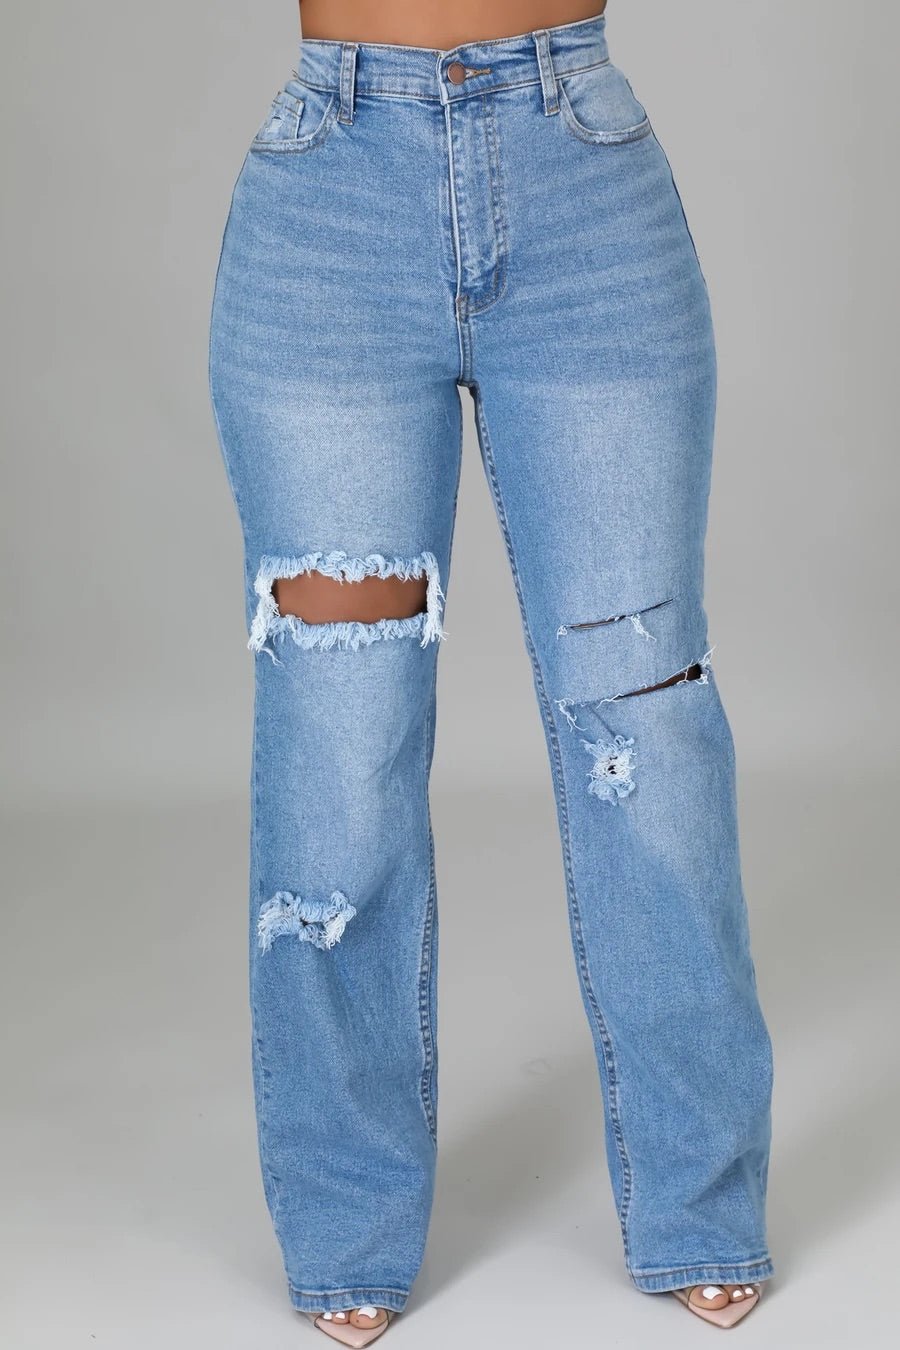 Dinah High Rise Distressed Jeans Medium Wash - Ali’s Couture 